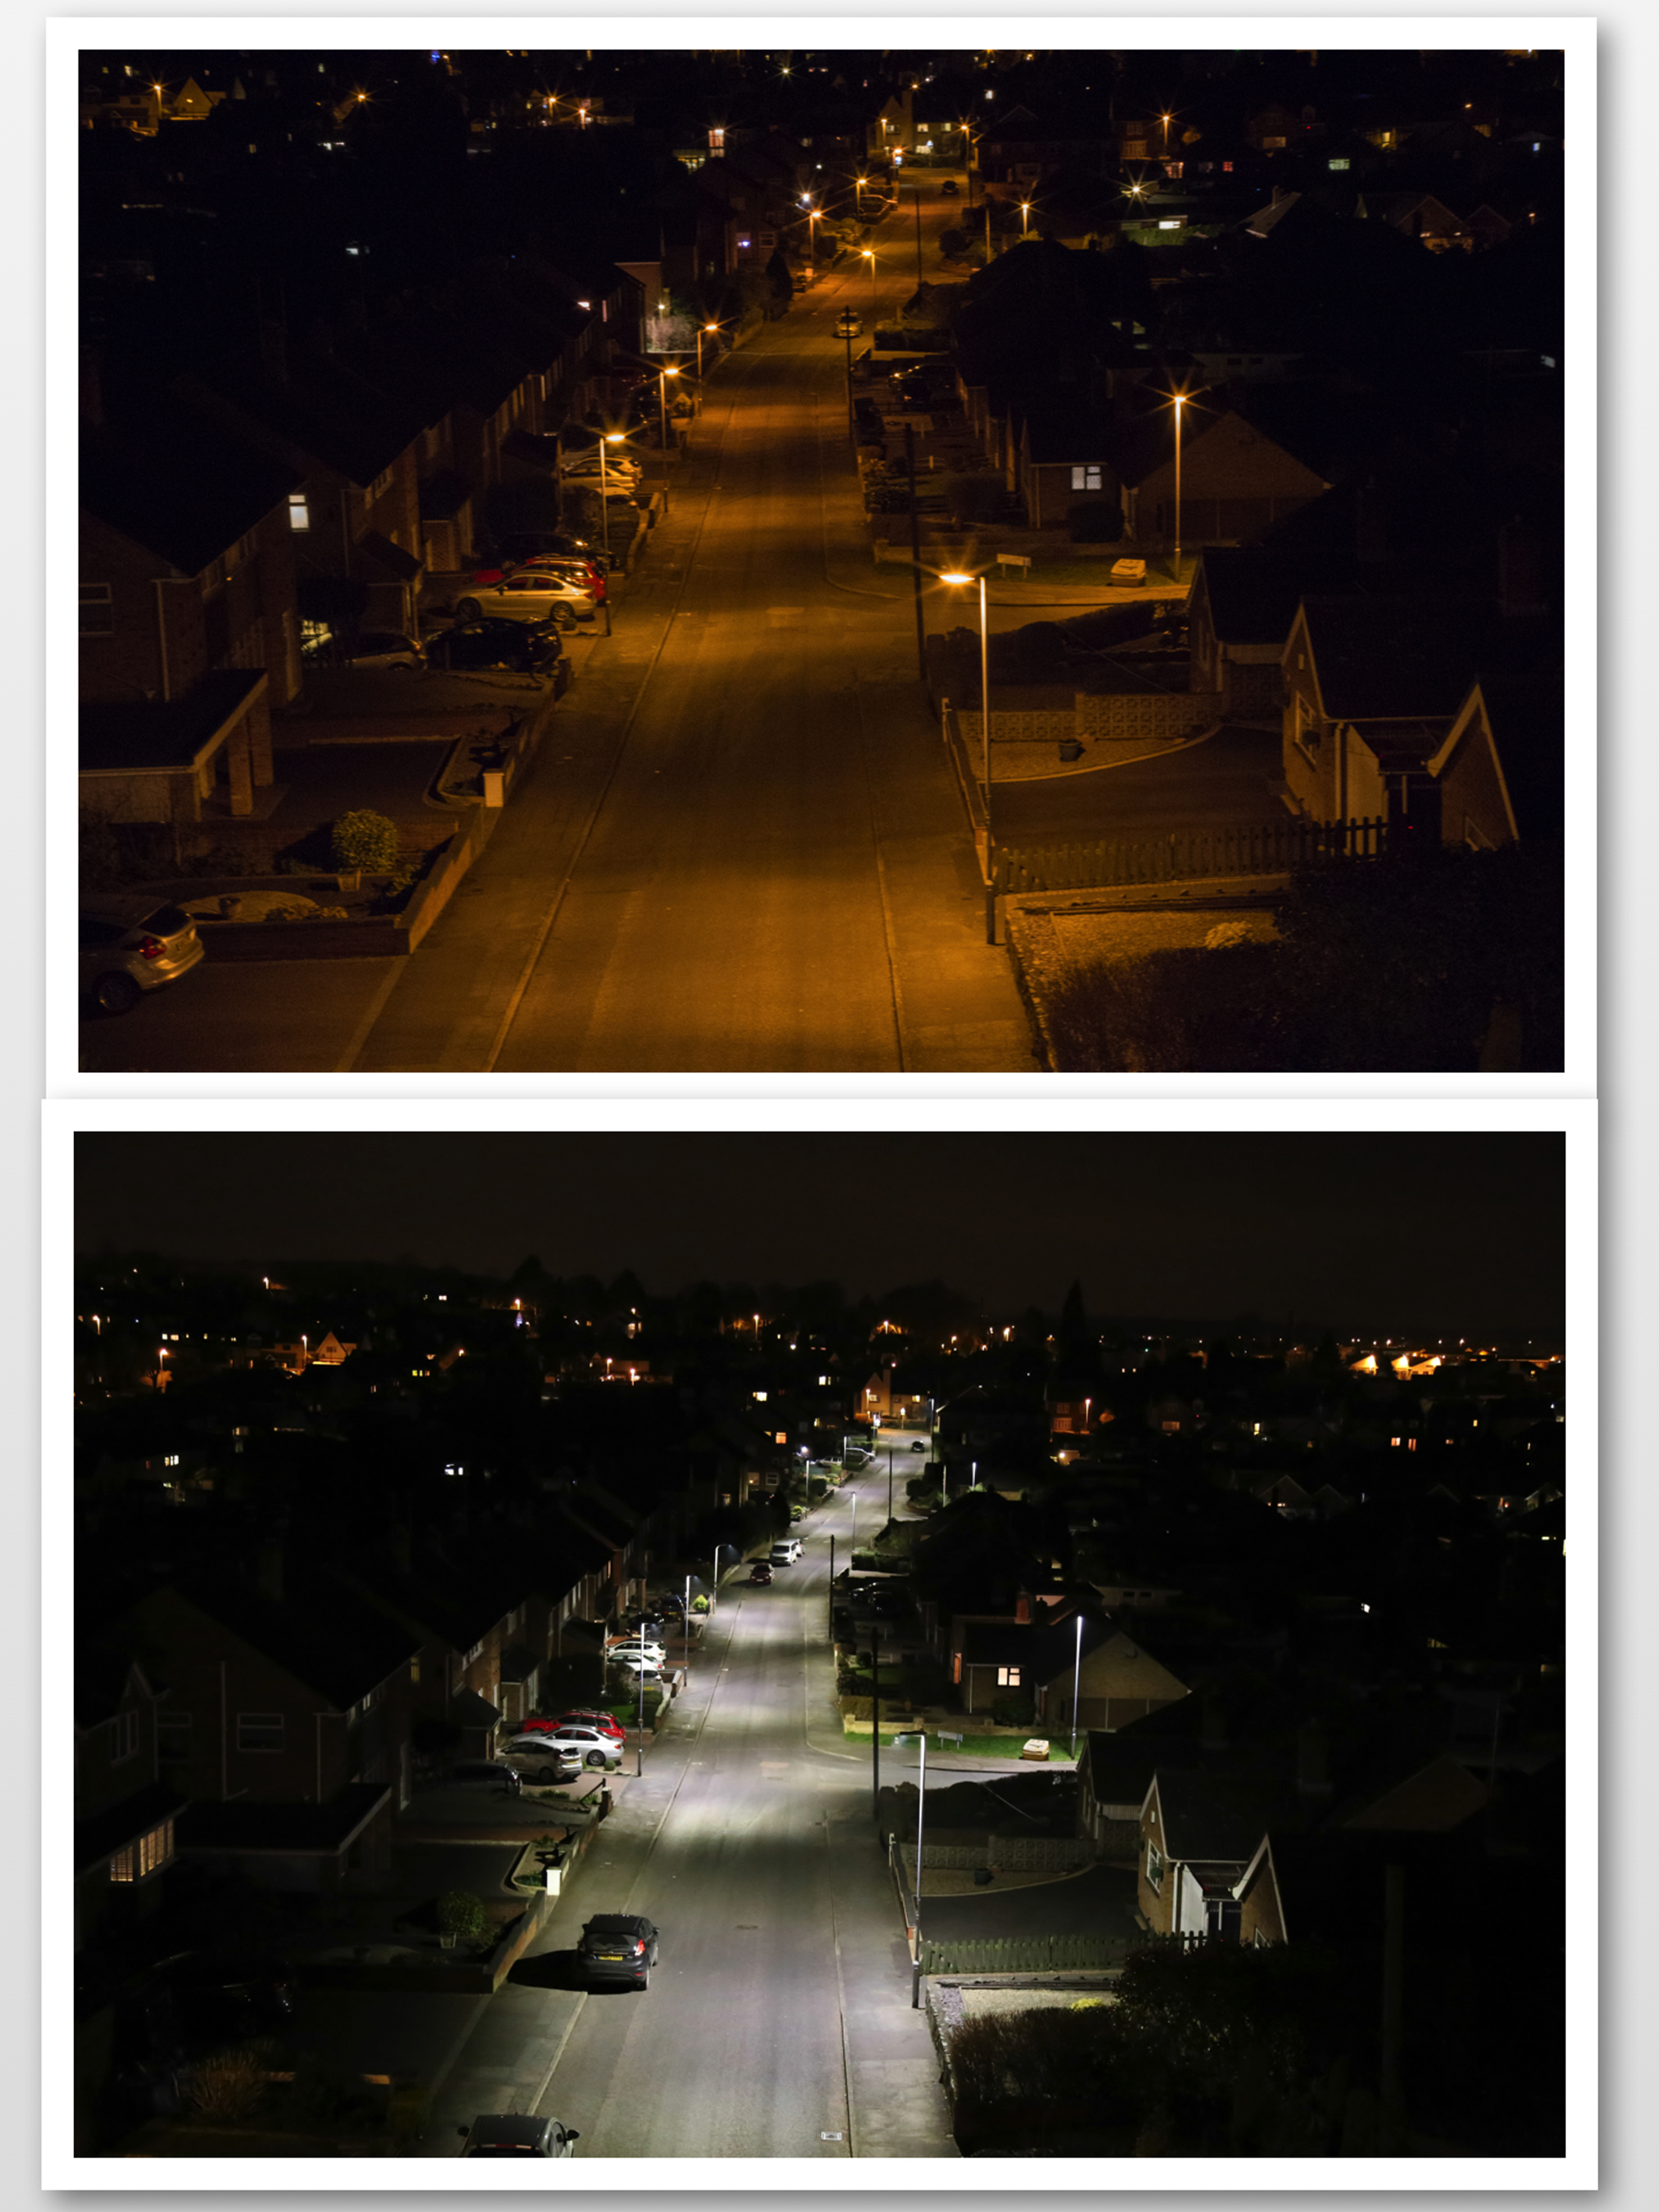 Comparison of traditional sodium lighting with LED lighting in typical British suburban street